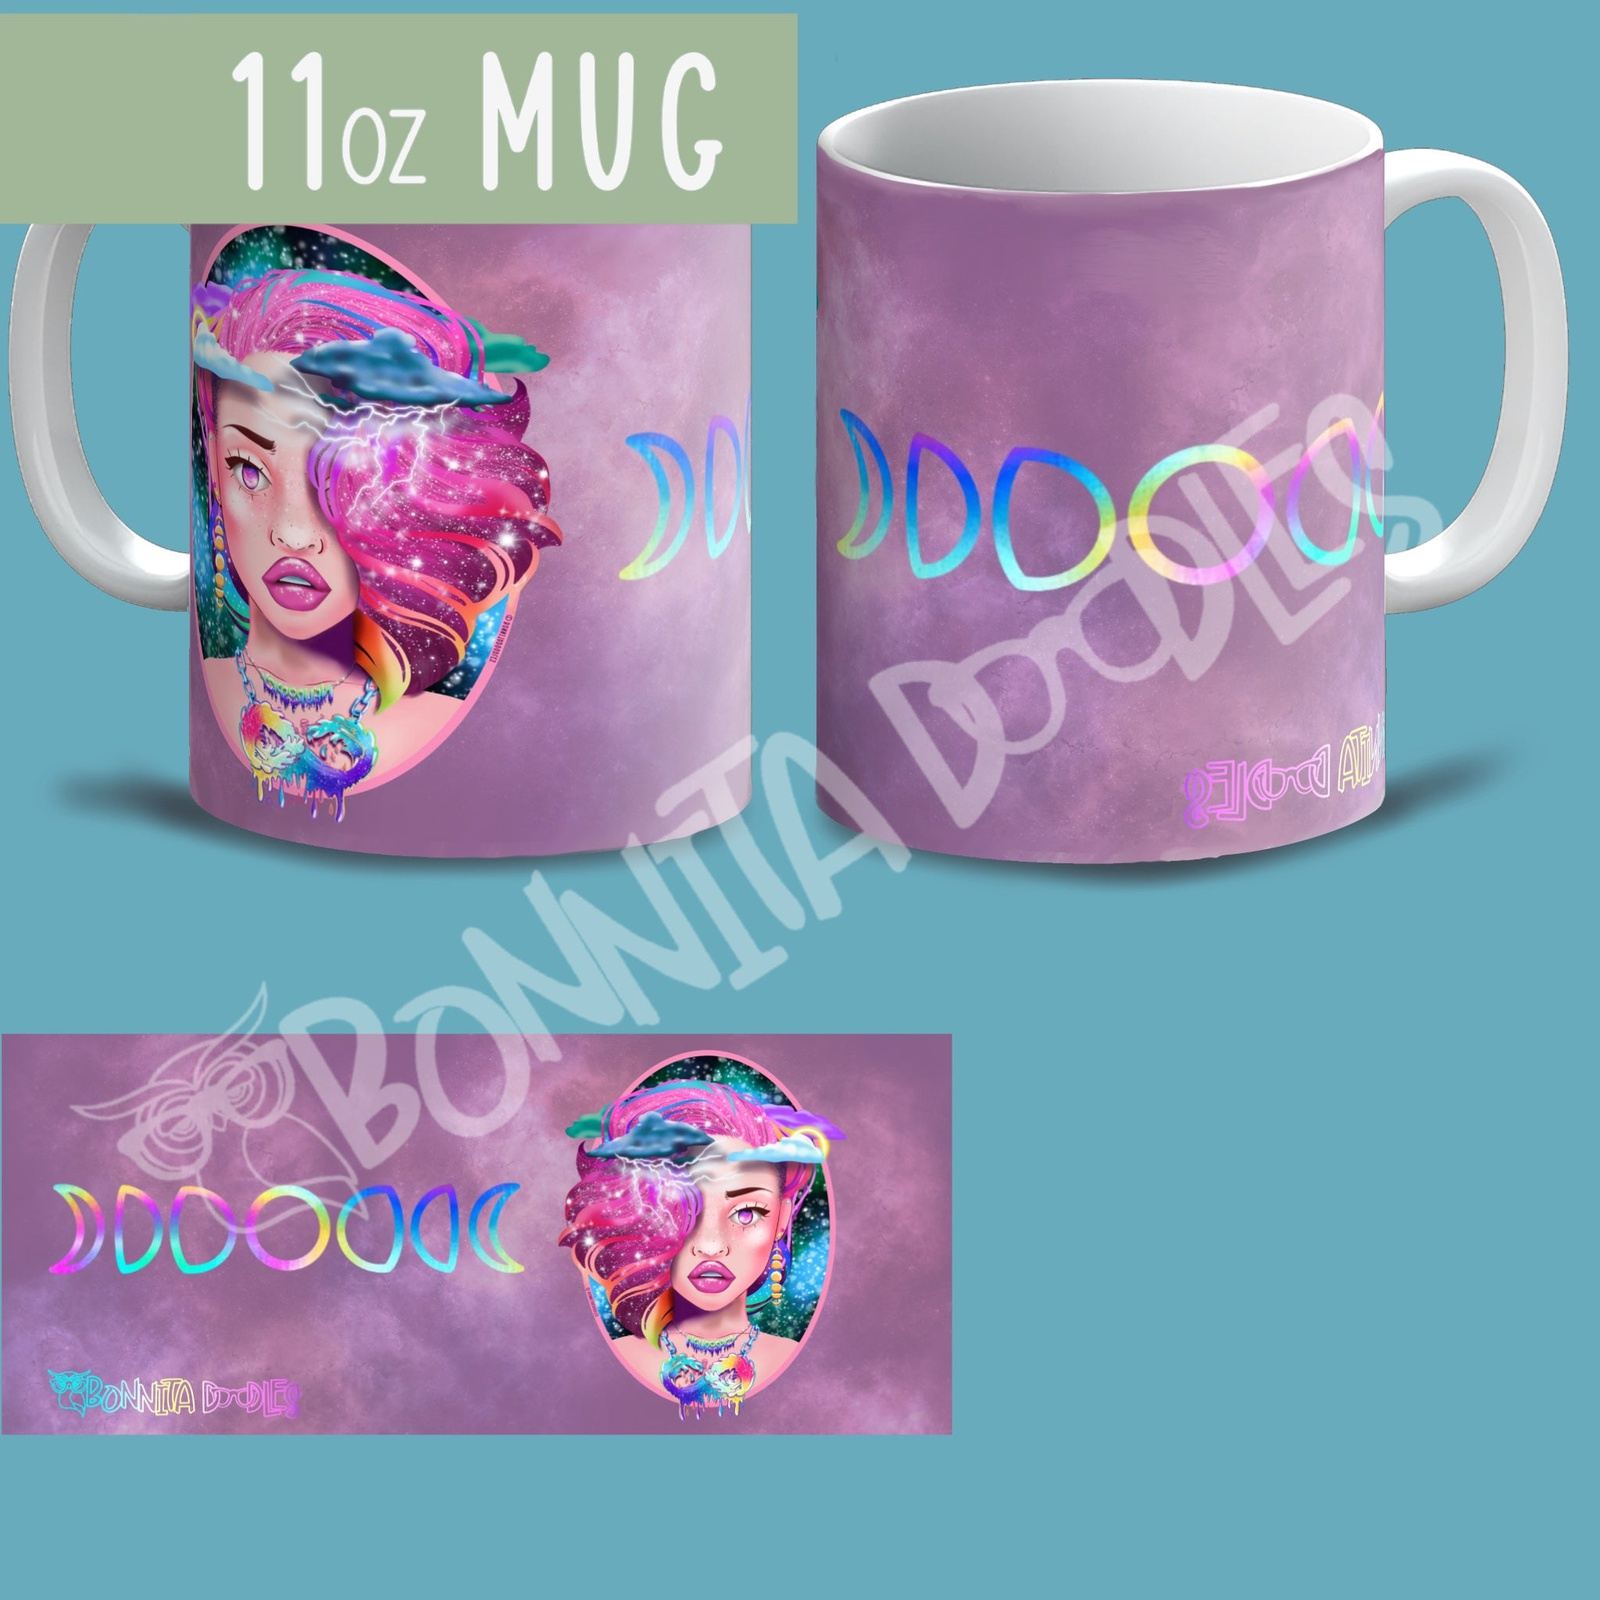 Neurospicy mug - made to order - can be personalised